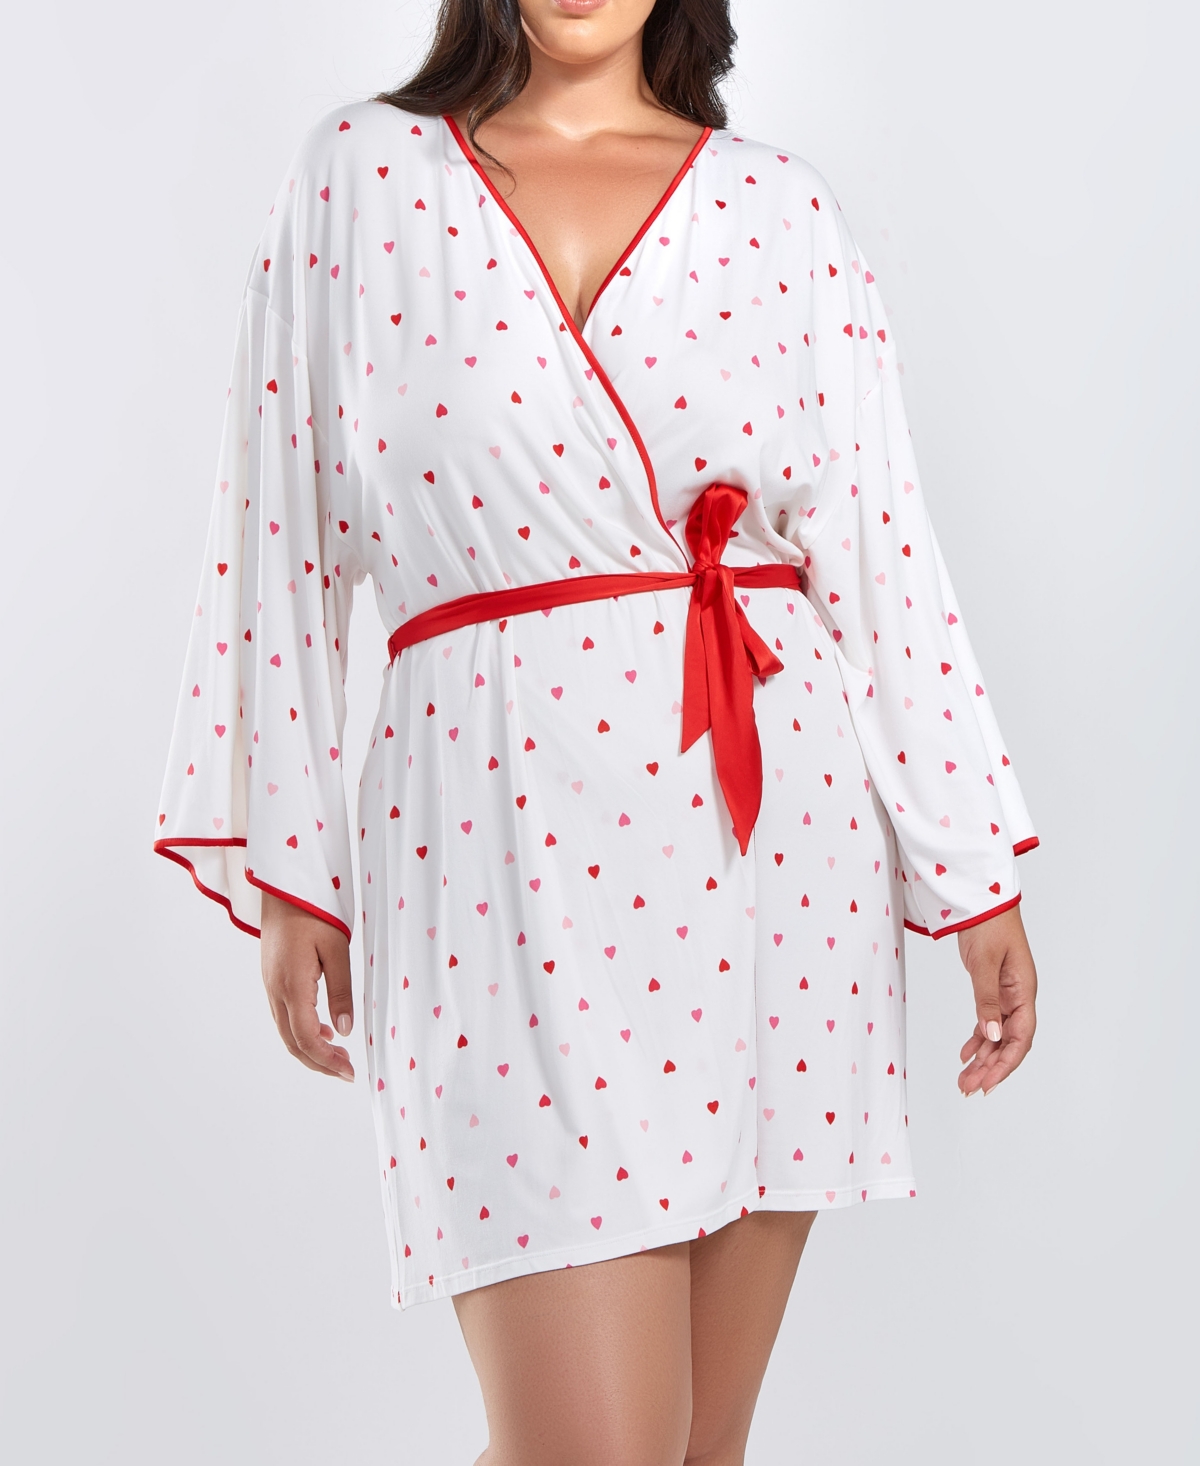 Icollection Kyley Plus Size Heart Print Robe With Contrast Self Tie Sash And Red Trim In White-red